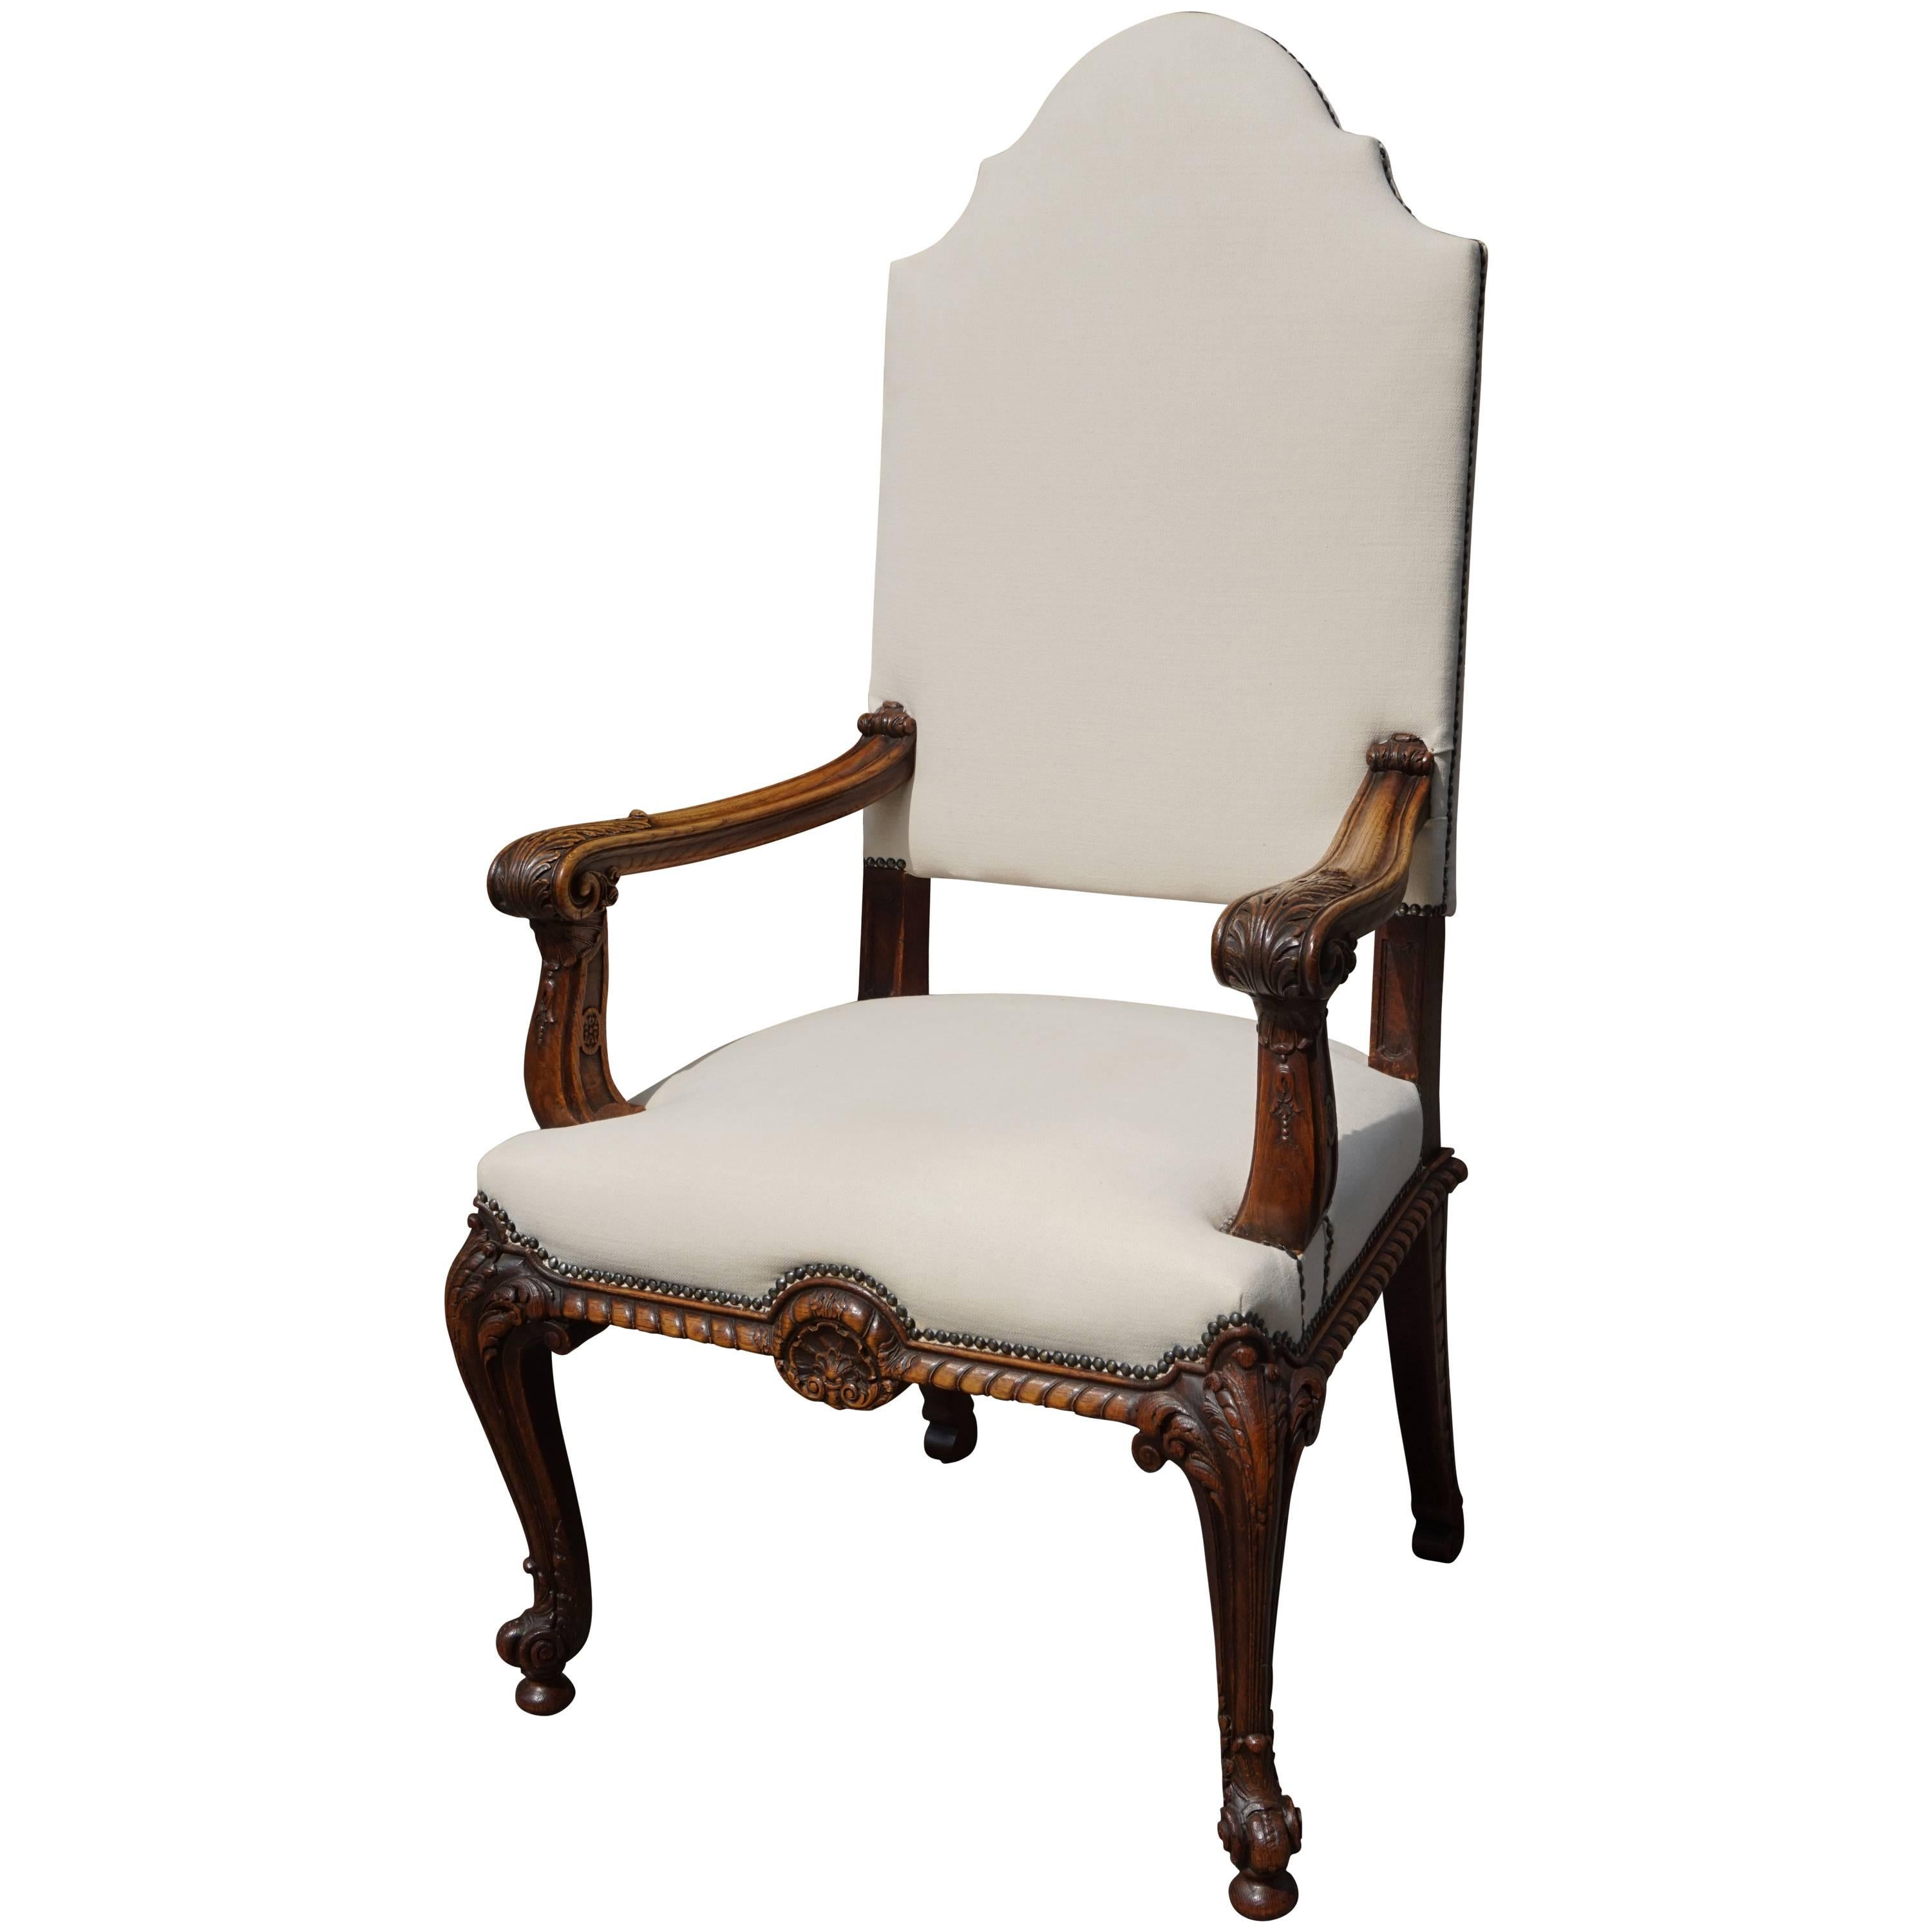 Antique Stunning & Hand-Carved Rococo Revival Armchair with Perfect Upholstery